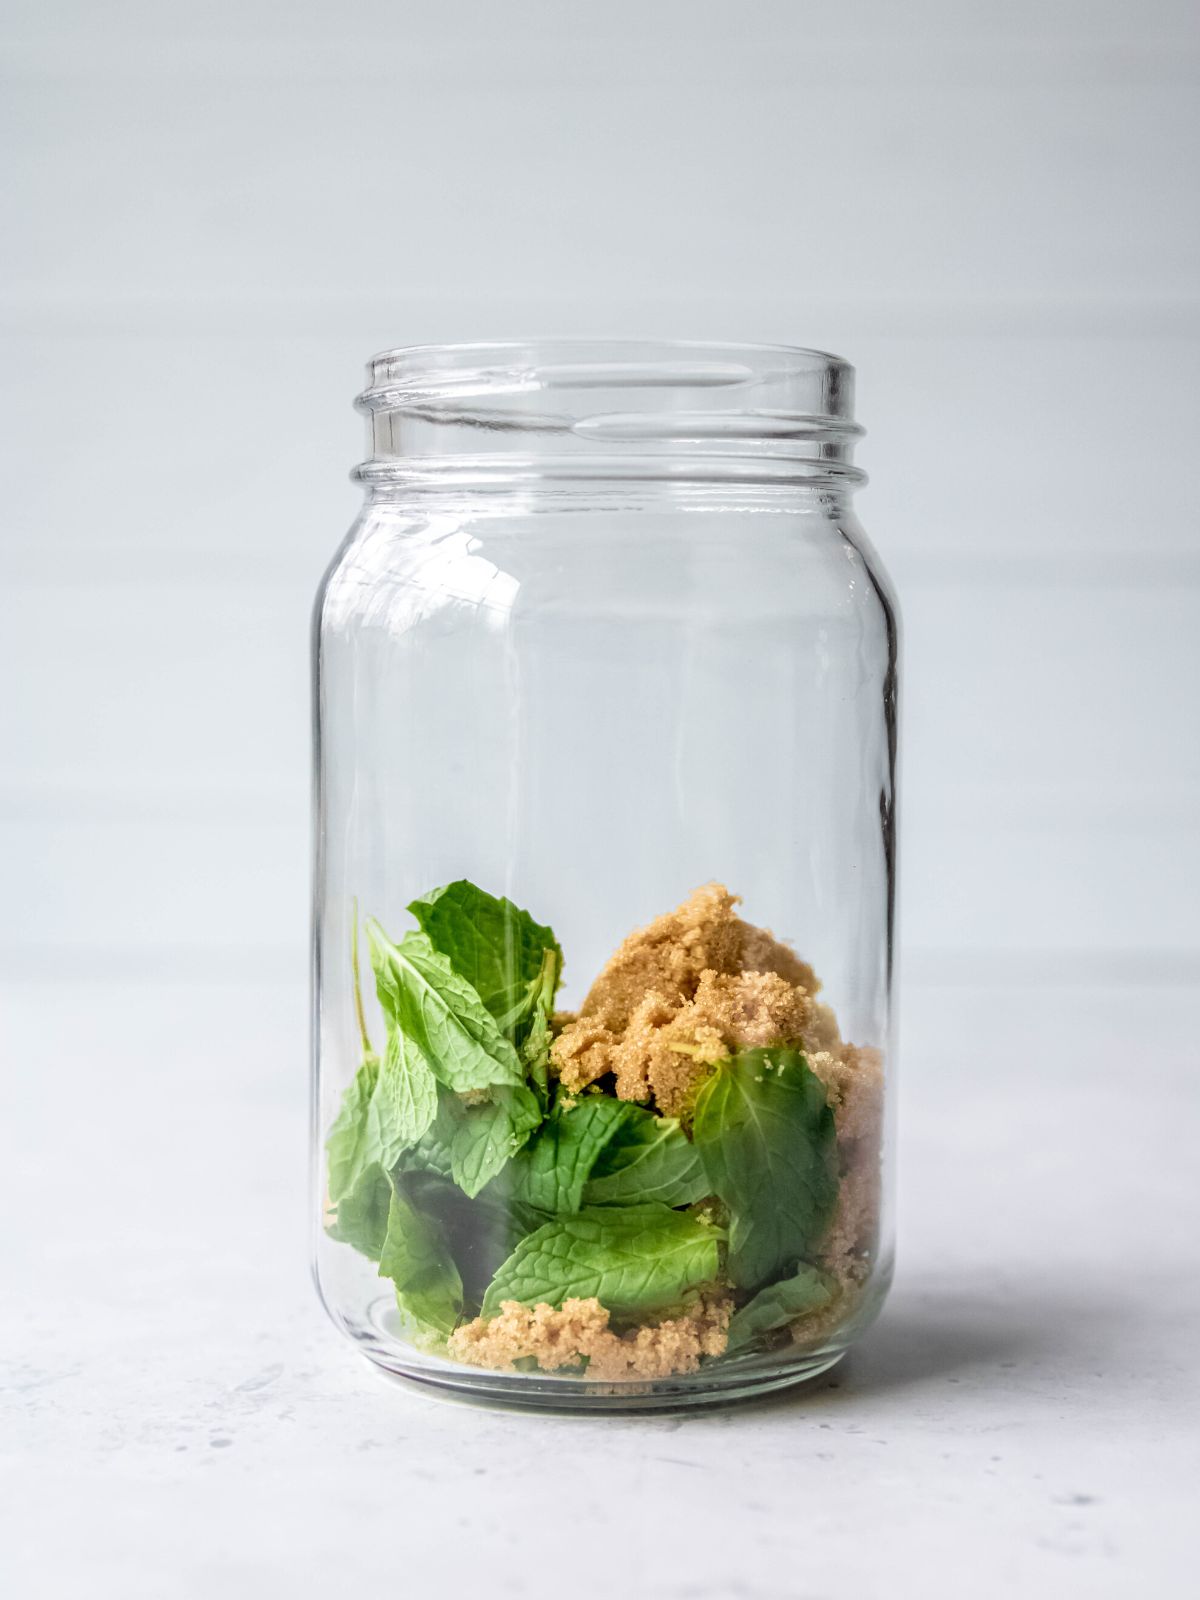 brown sugar and mint leaves in a mason jar.